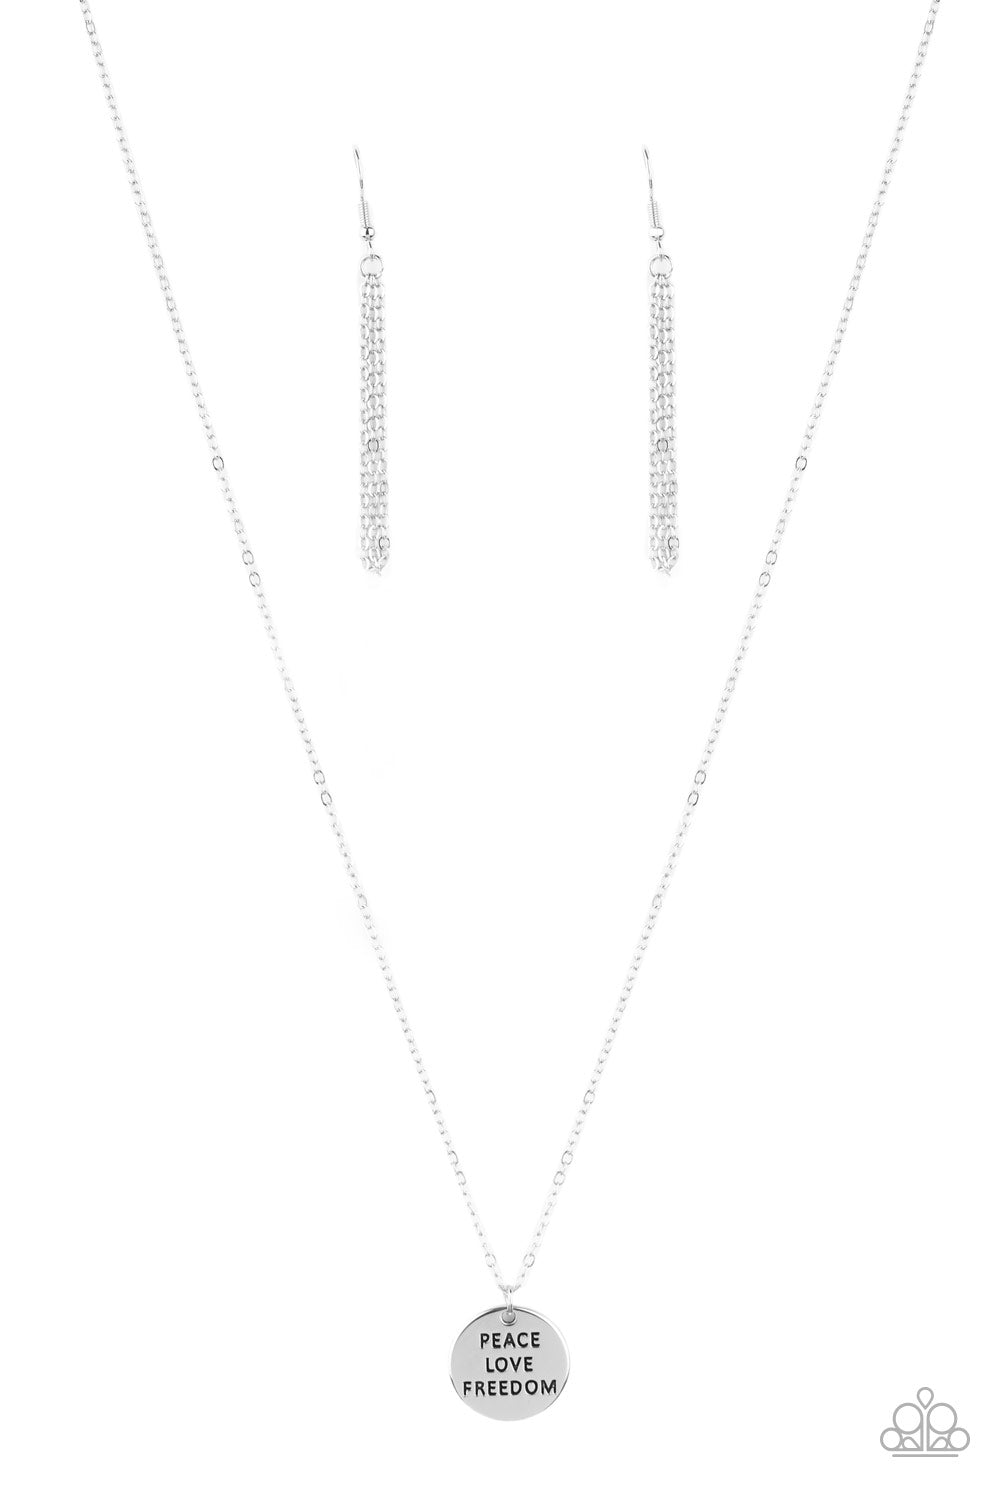 Freedom Isnt Free - Silver Necklace Set